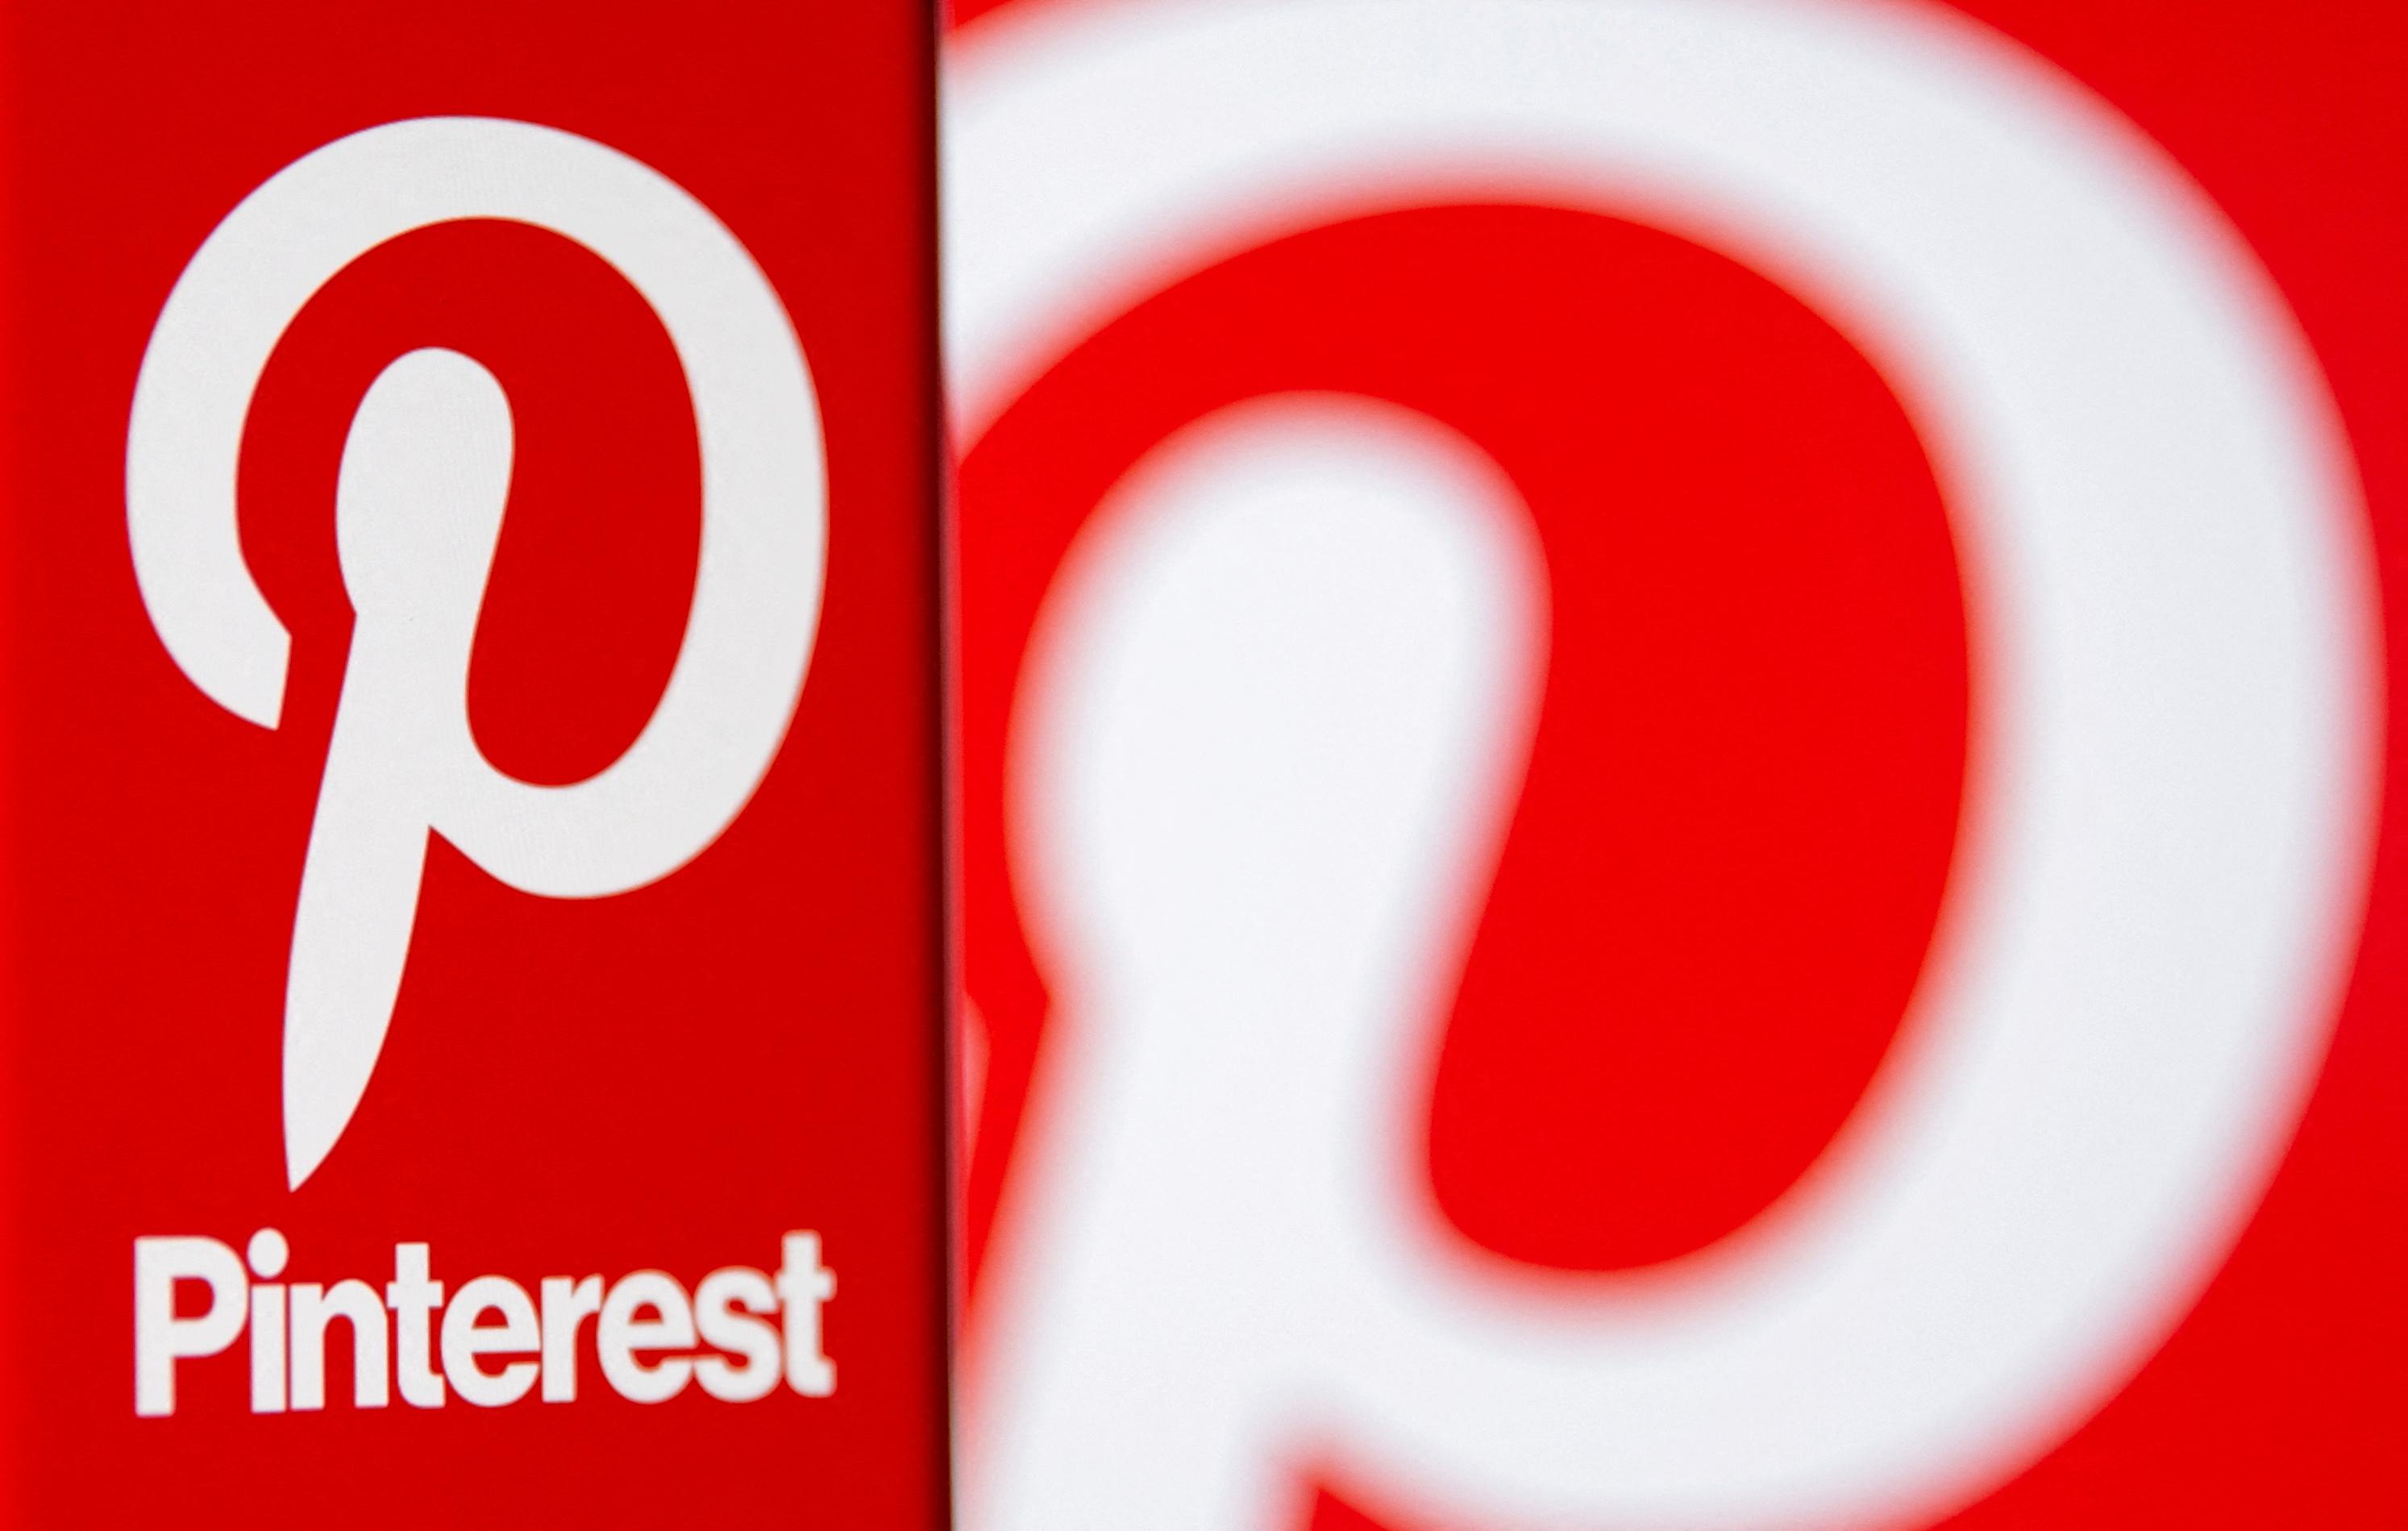 Pinterest logo is seen on smartphone in this illustration